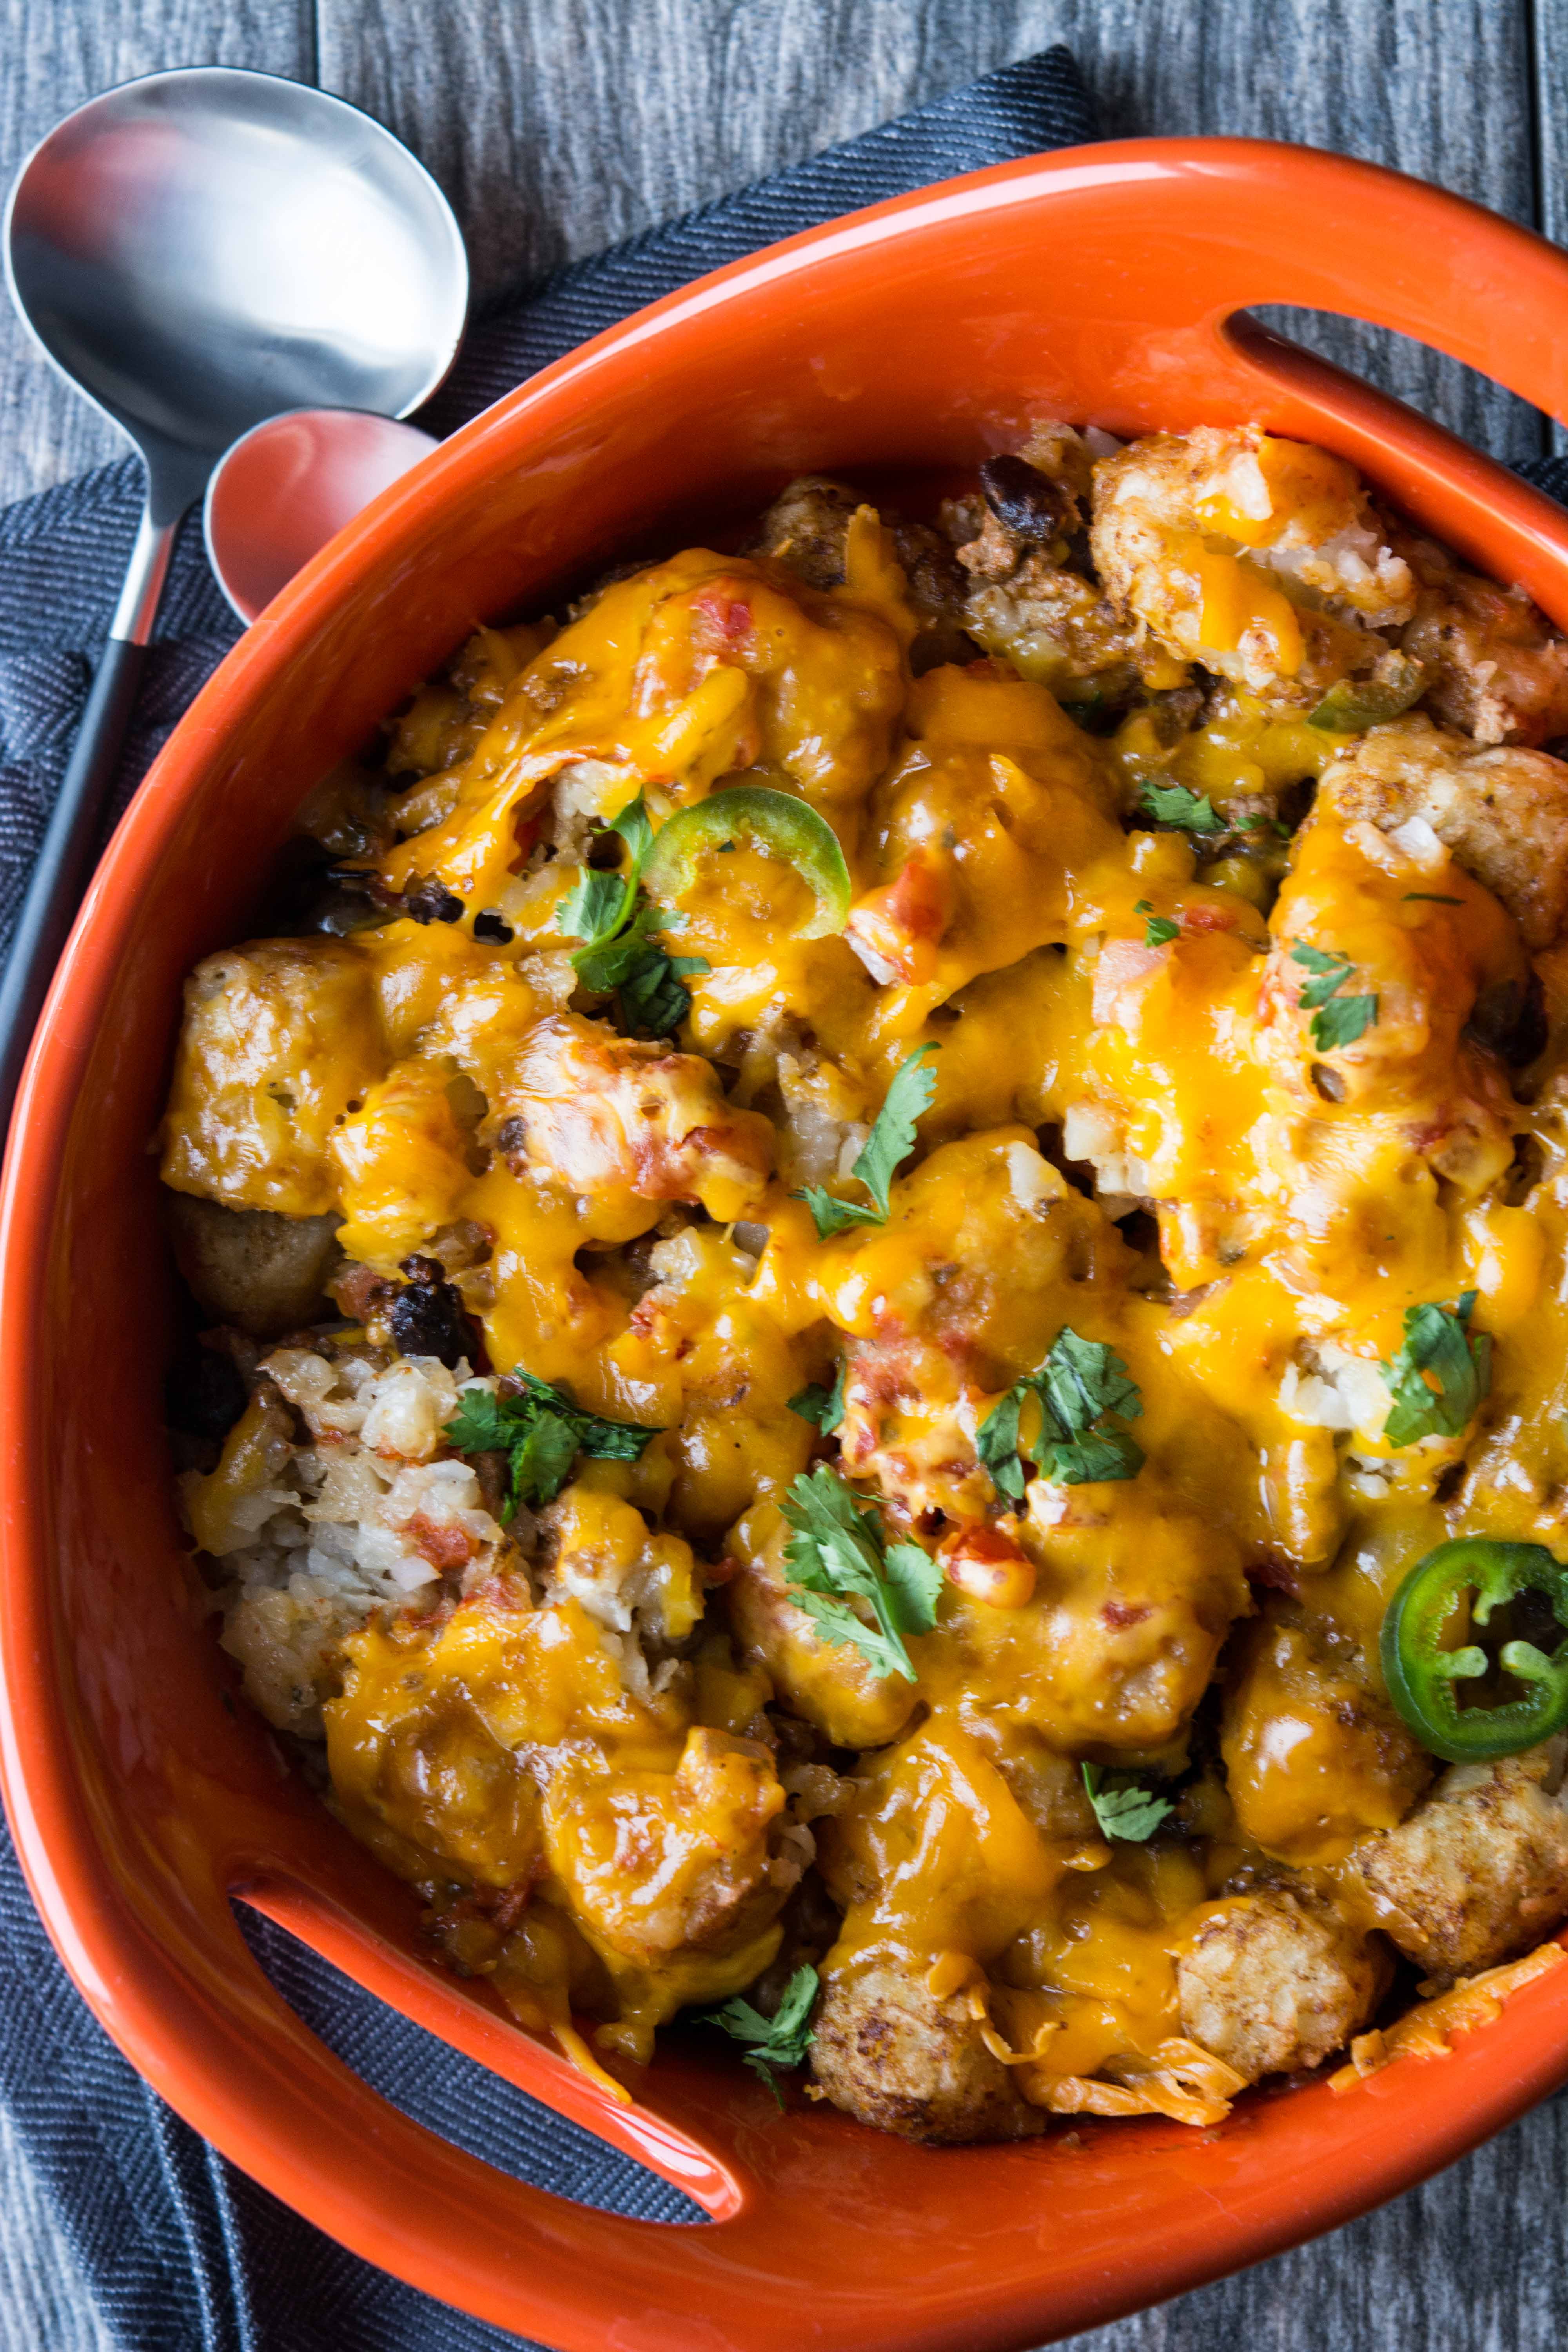 Slow Cooker Taco Tater Tot Casserole - Slow Cooker Gourmet